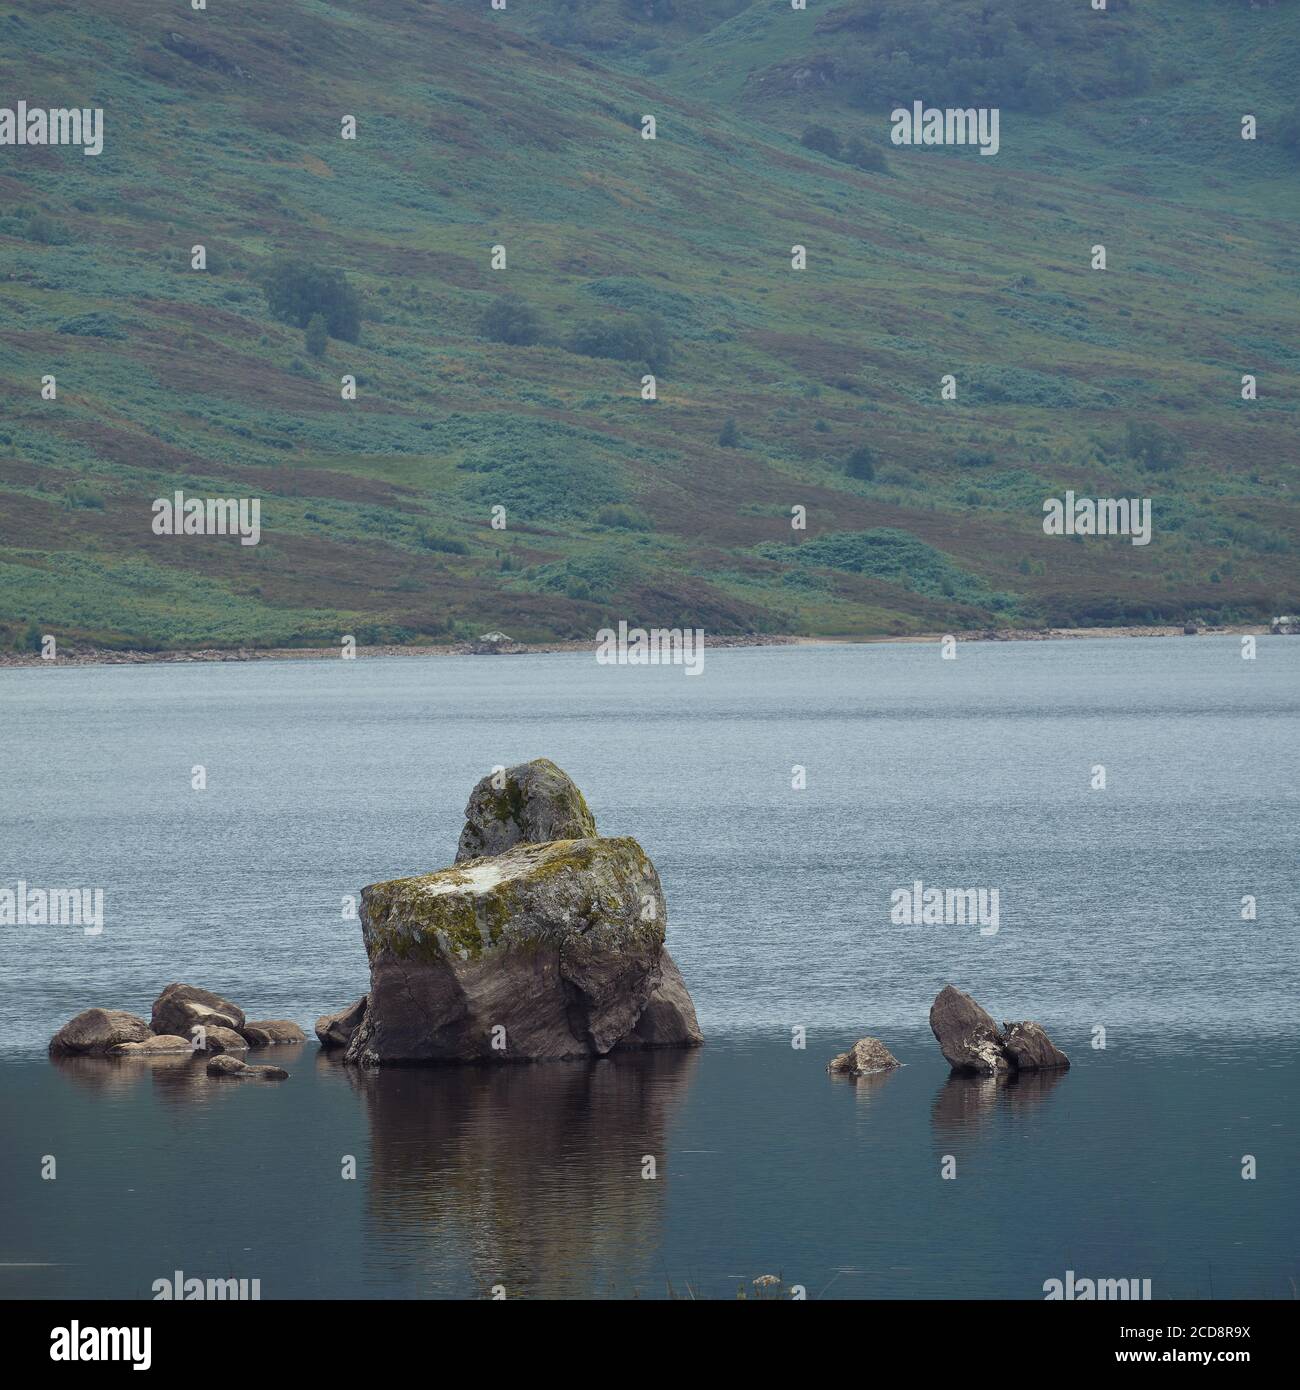 Scottish landscape with a large rock in a mountain lake in the foreground. Loch Arklet, Scotland Stock Photo